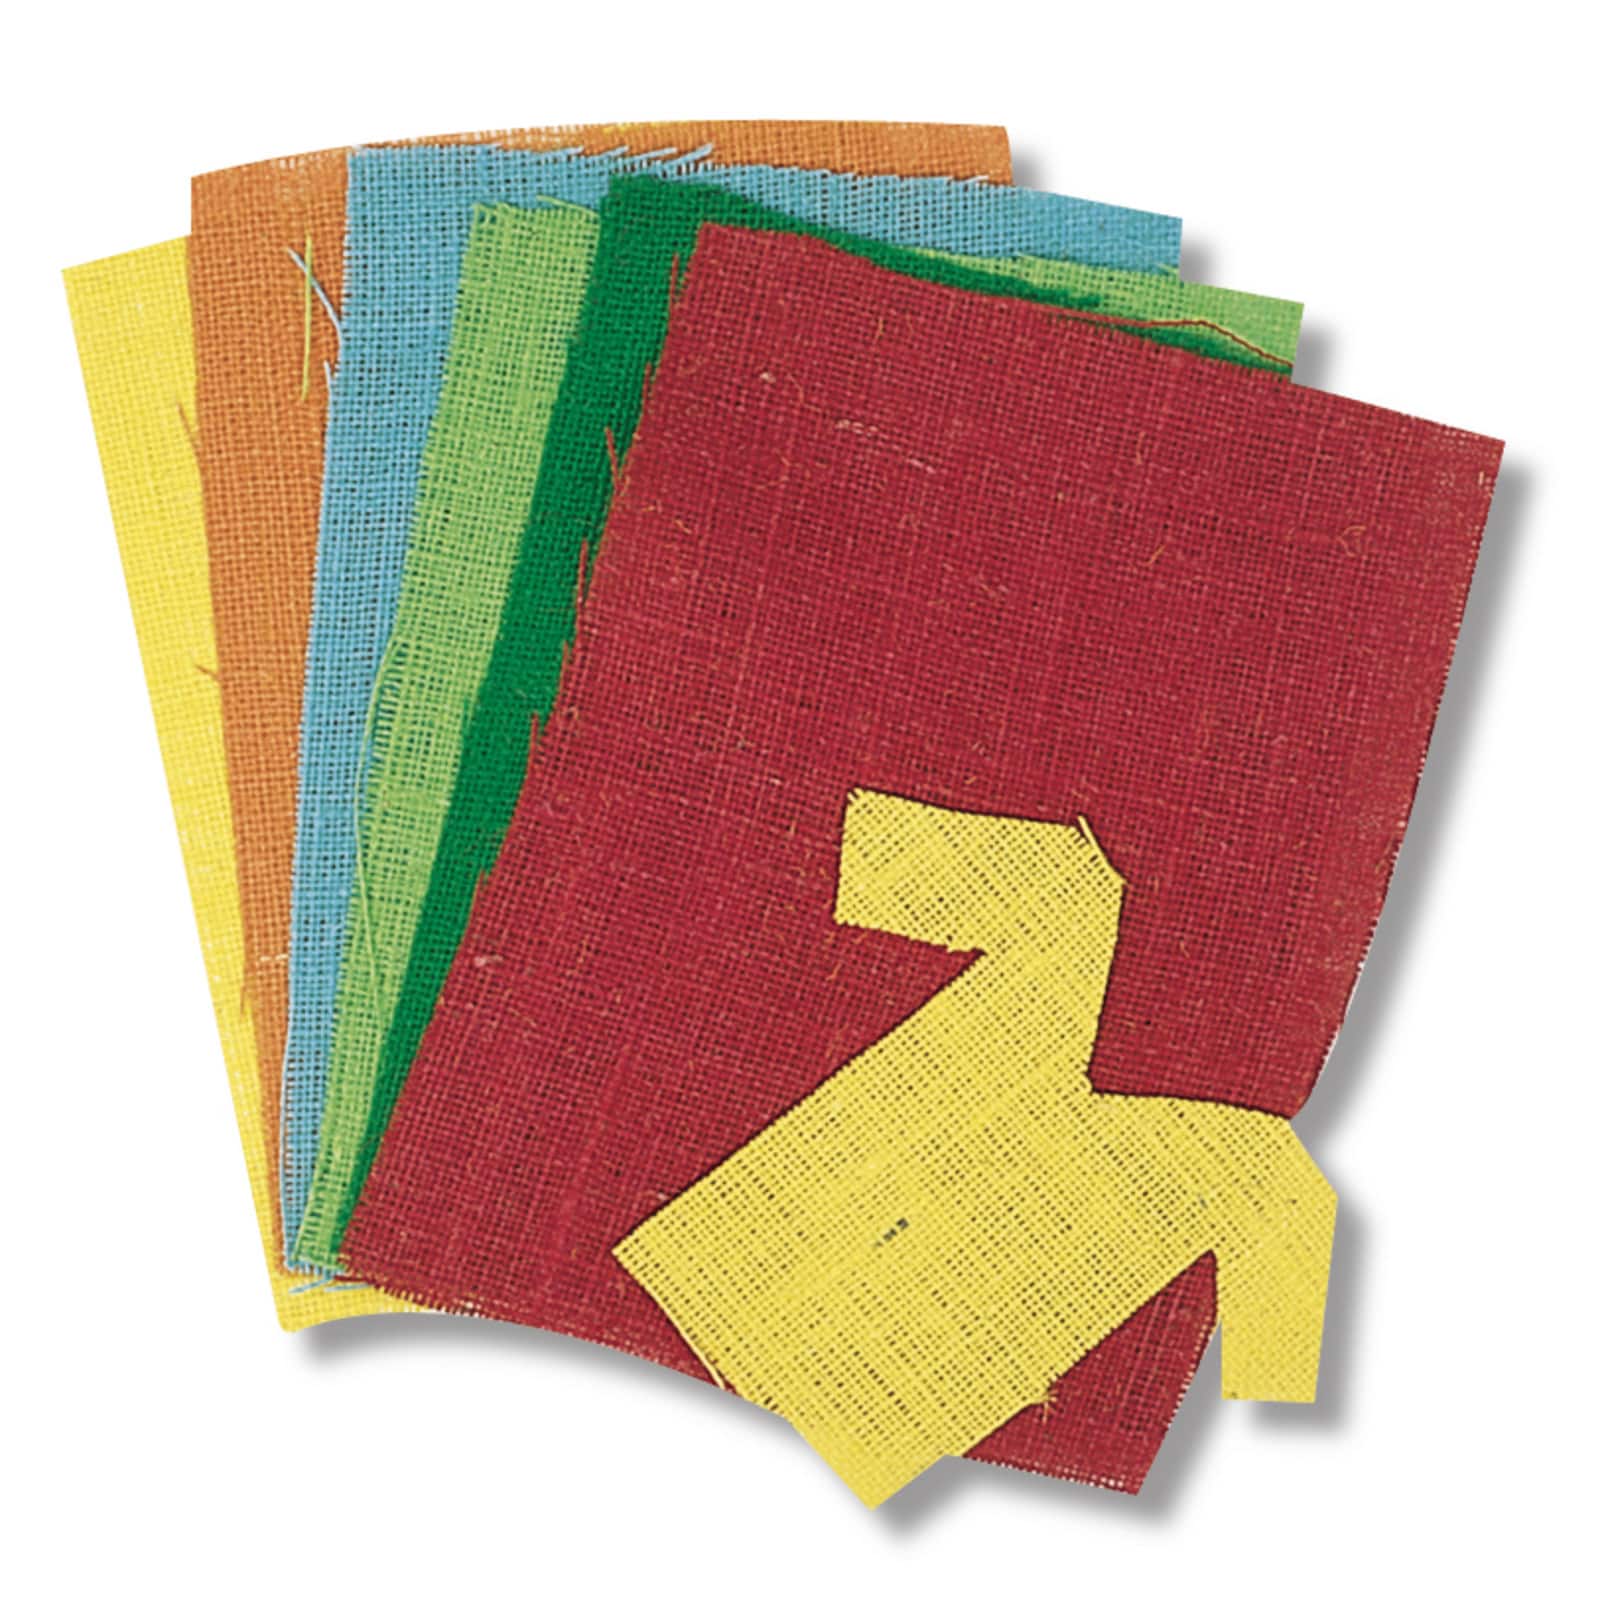 Hygloss Paper Frames Kit: Assorted Colors, 6 Each of 3 Sizes, 18 Frames